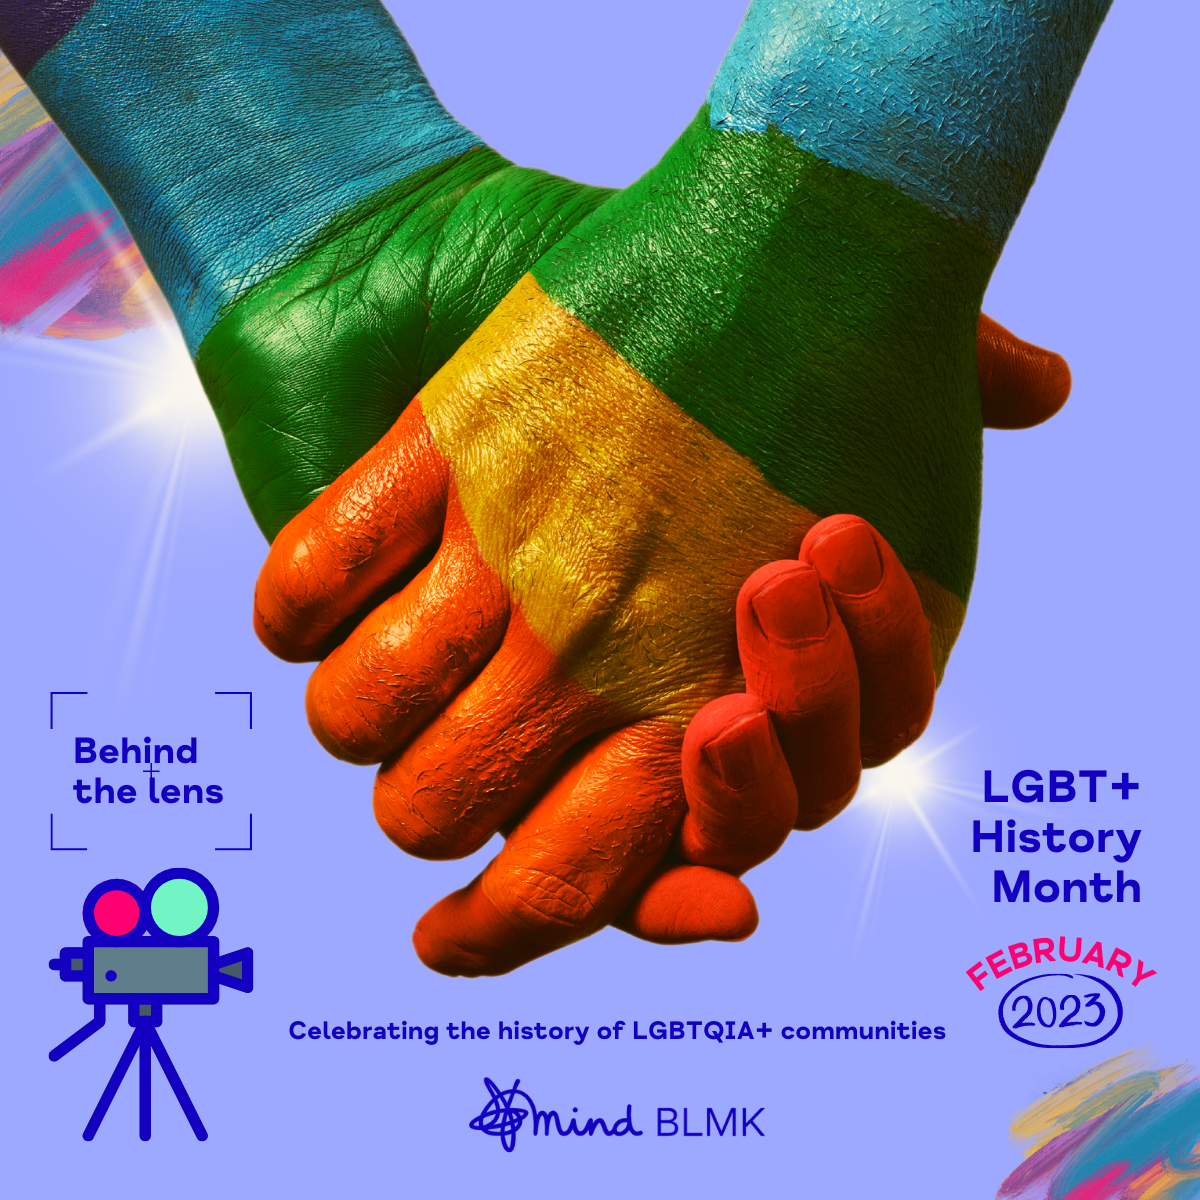 Behind the lens – LGBT+History Month with Lucy Foley